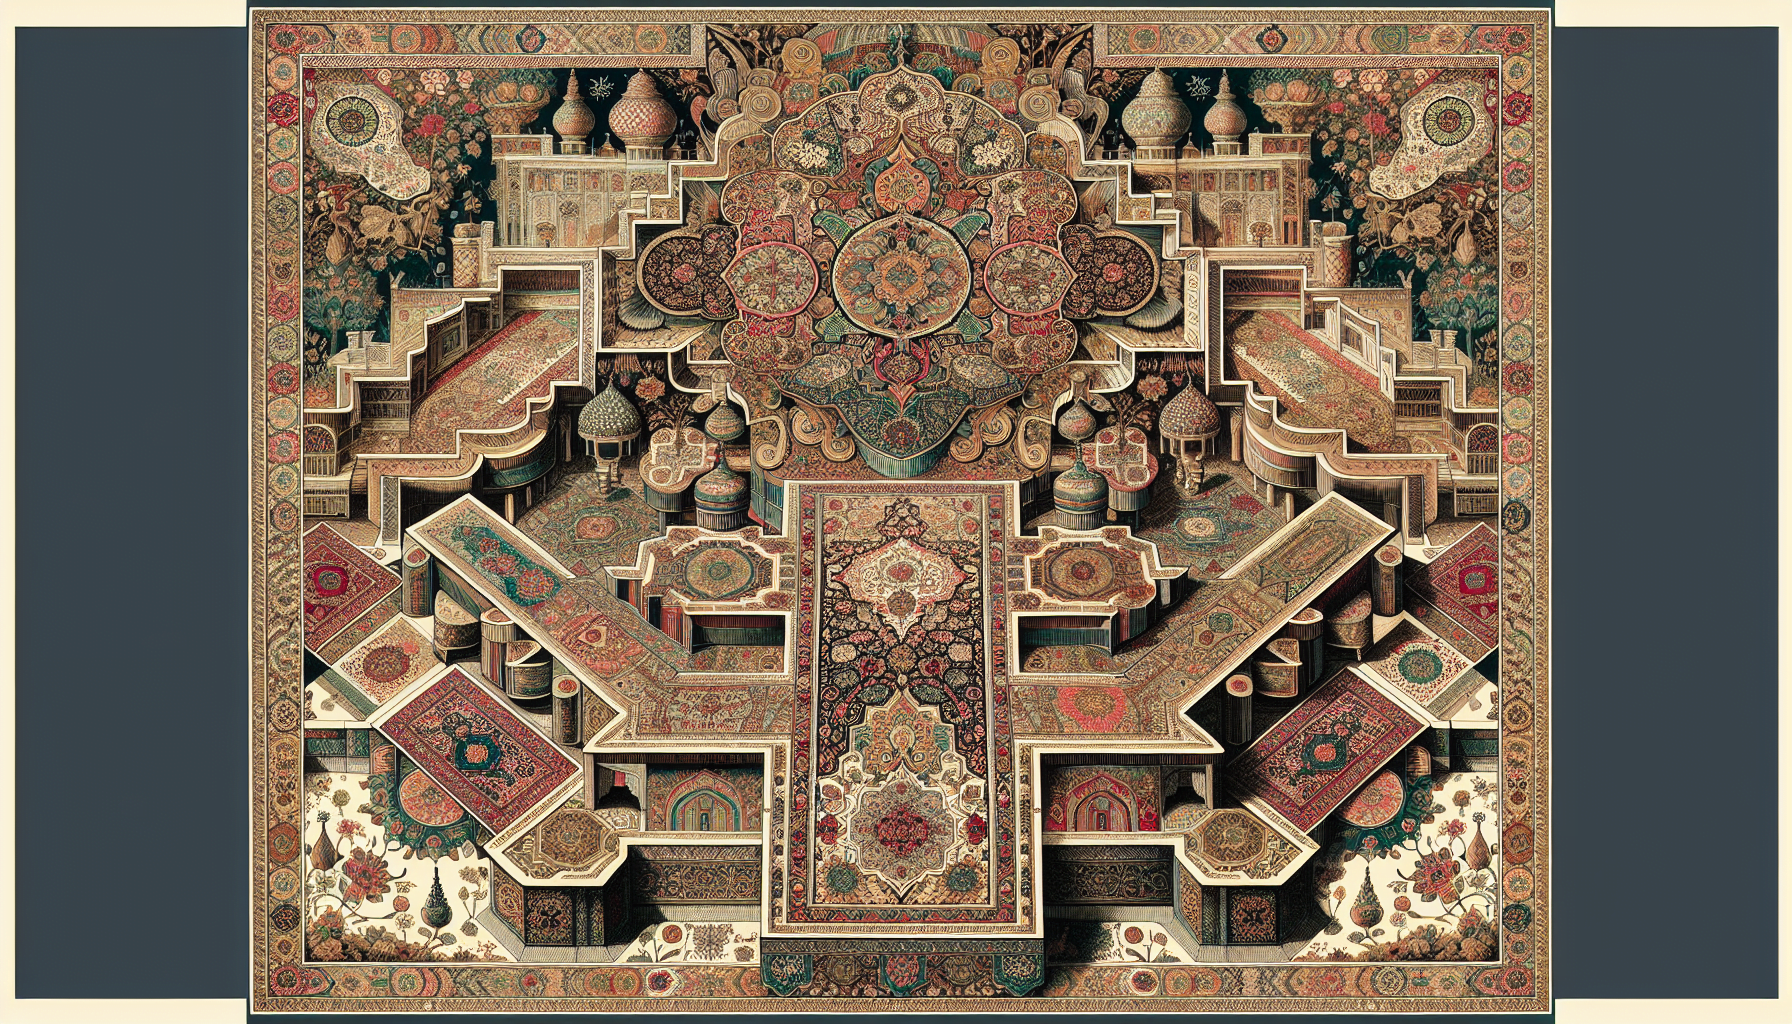 Illustration of traditional persian rug motifs and designs